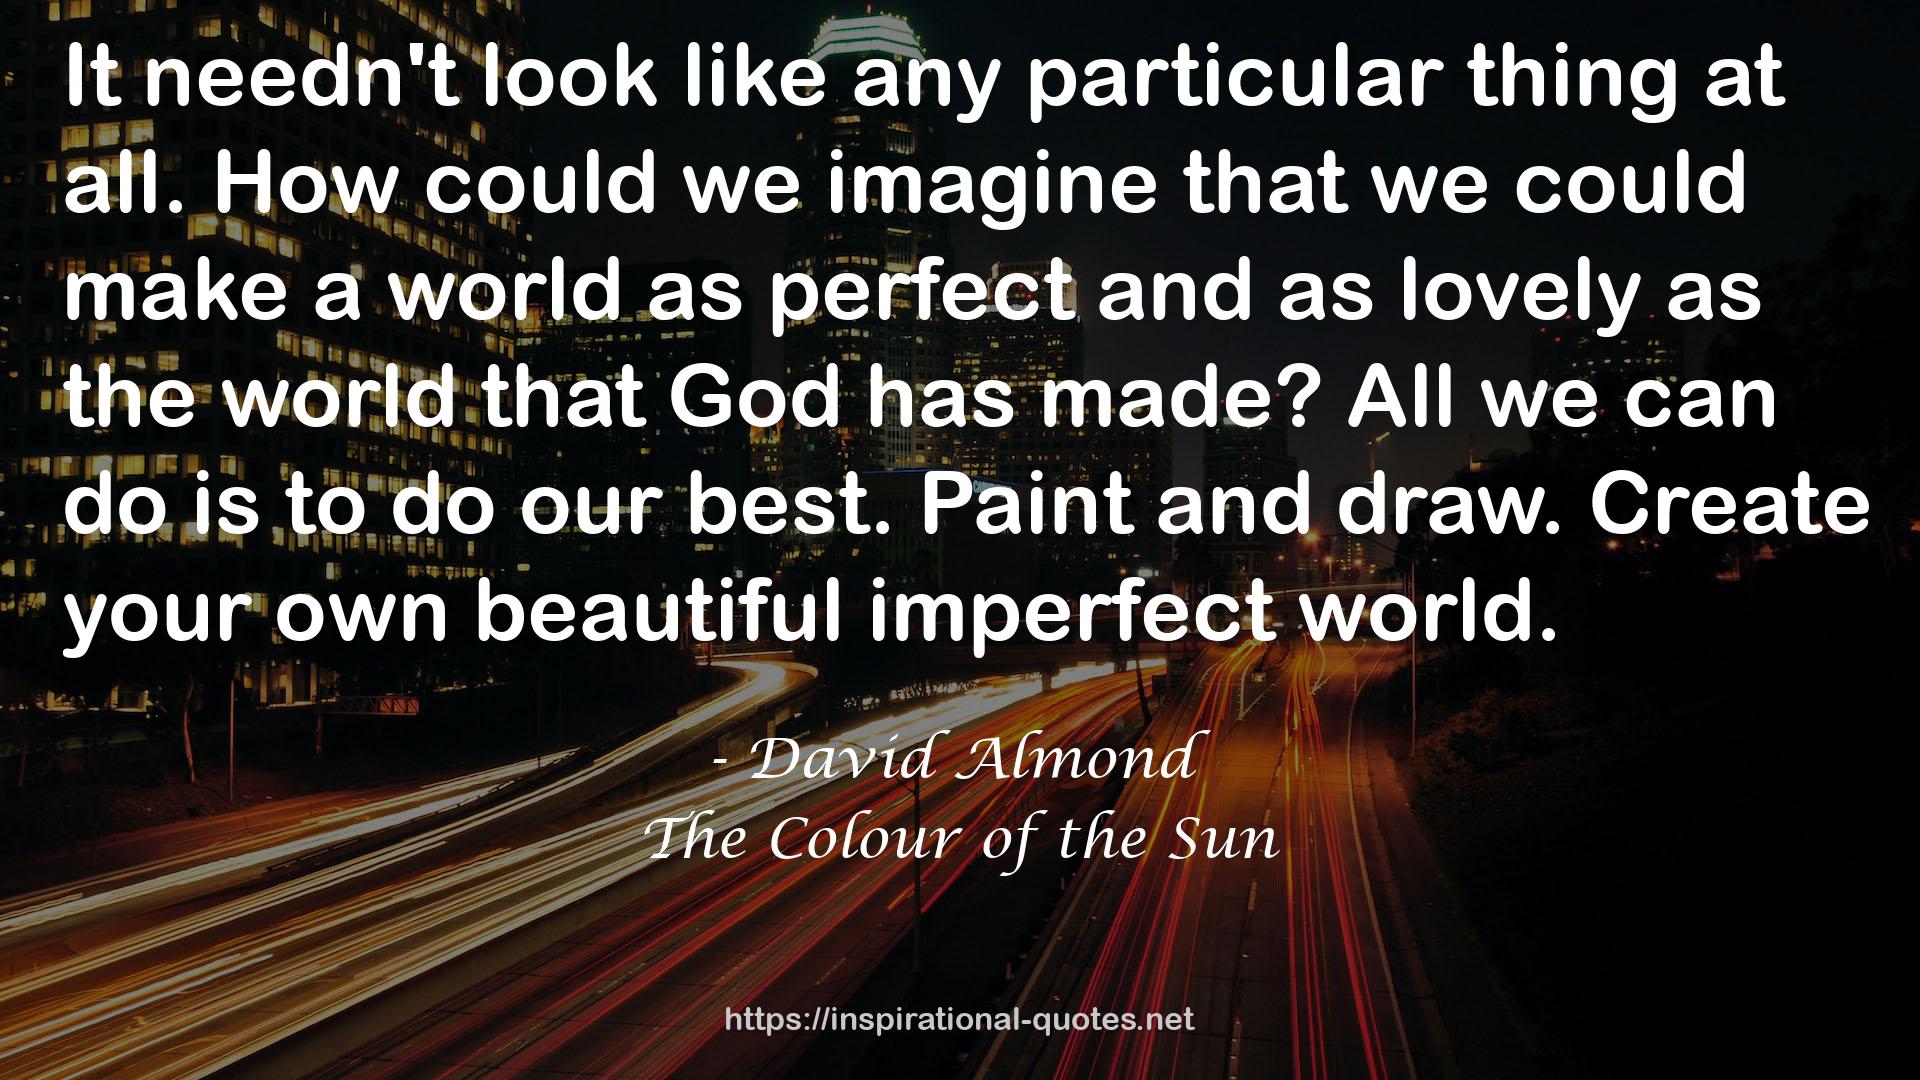 The Colour of the Sun QUOTES